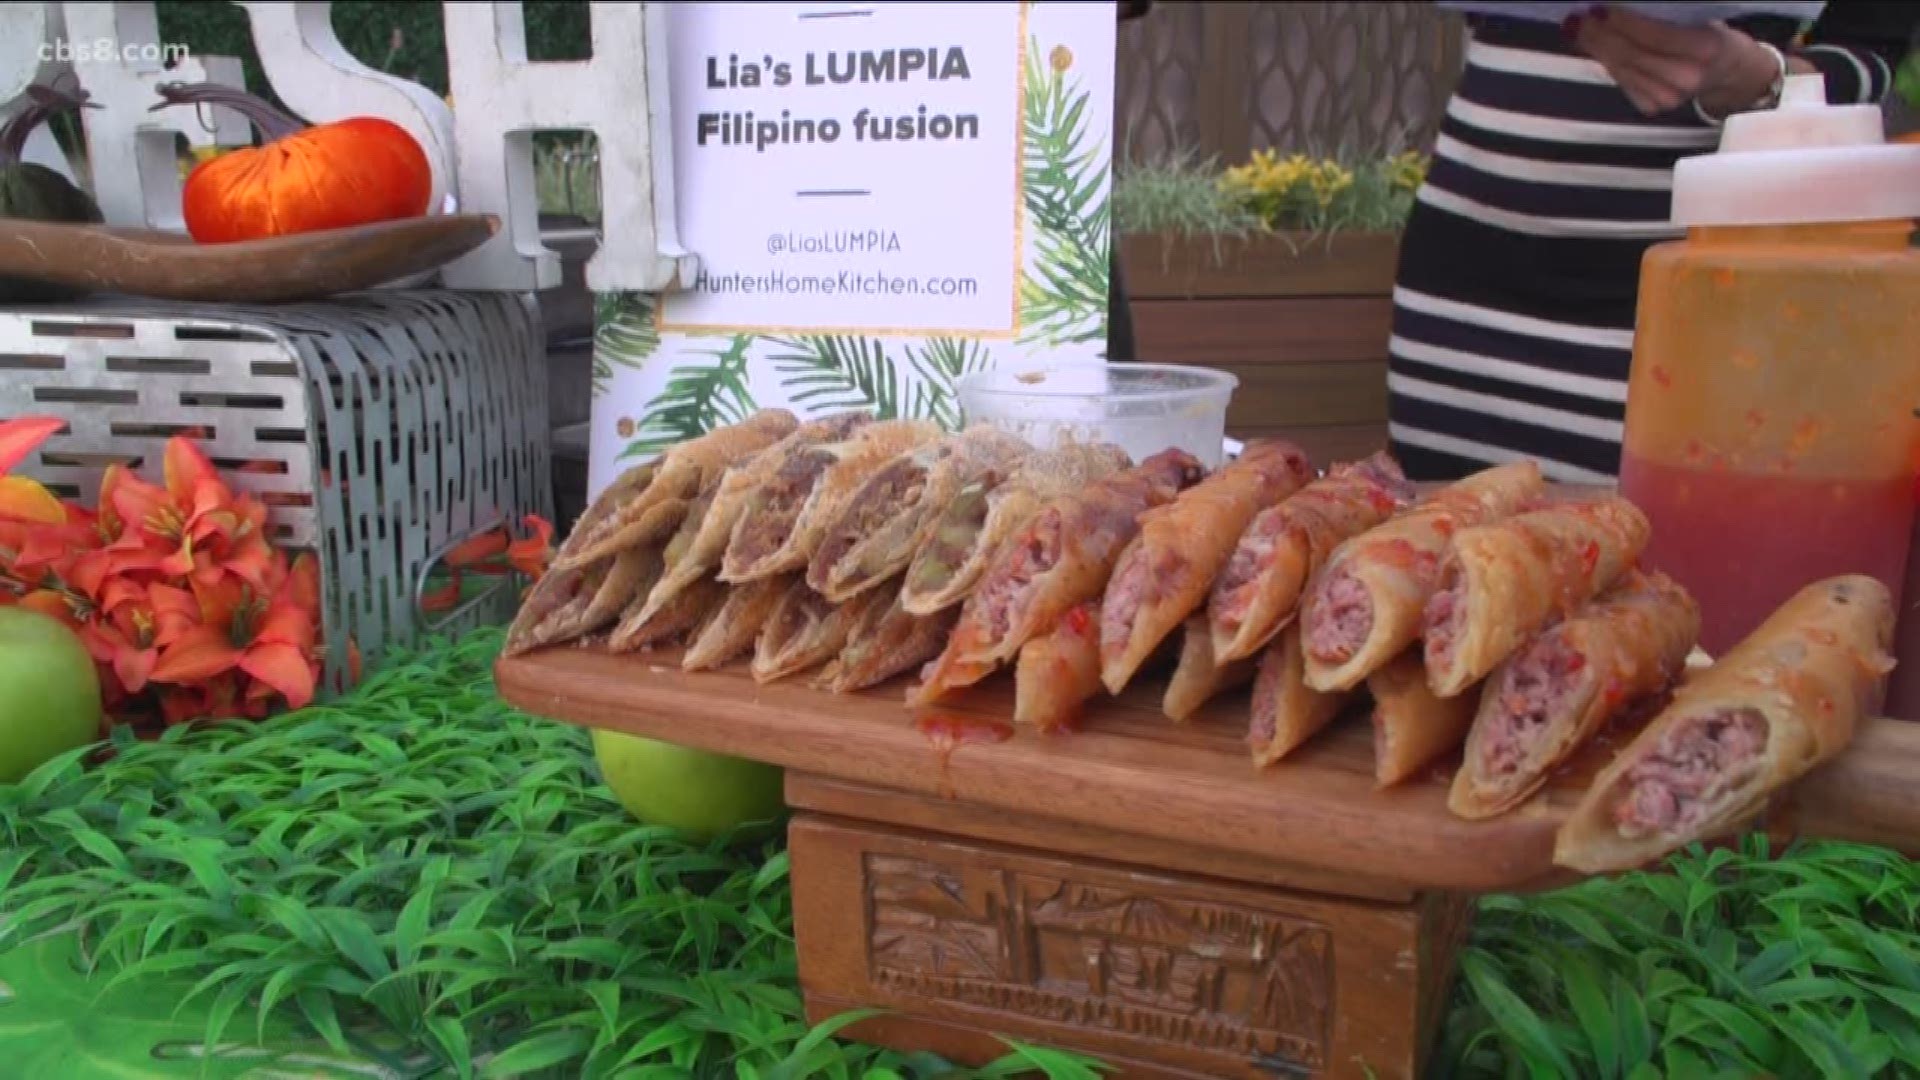 Watch Lia’s Lumpia executive chef Spencer & his friend Tania battle it out on the Great Food Truck Race.